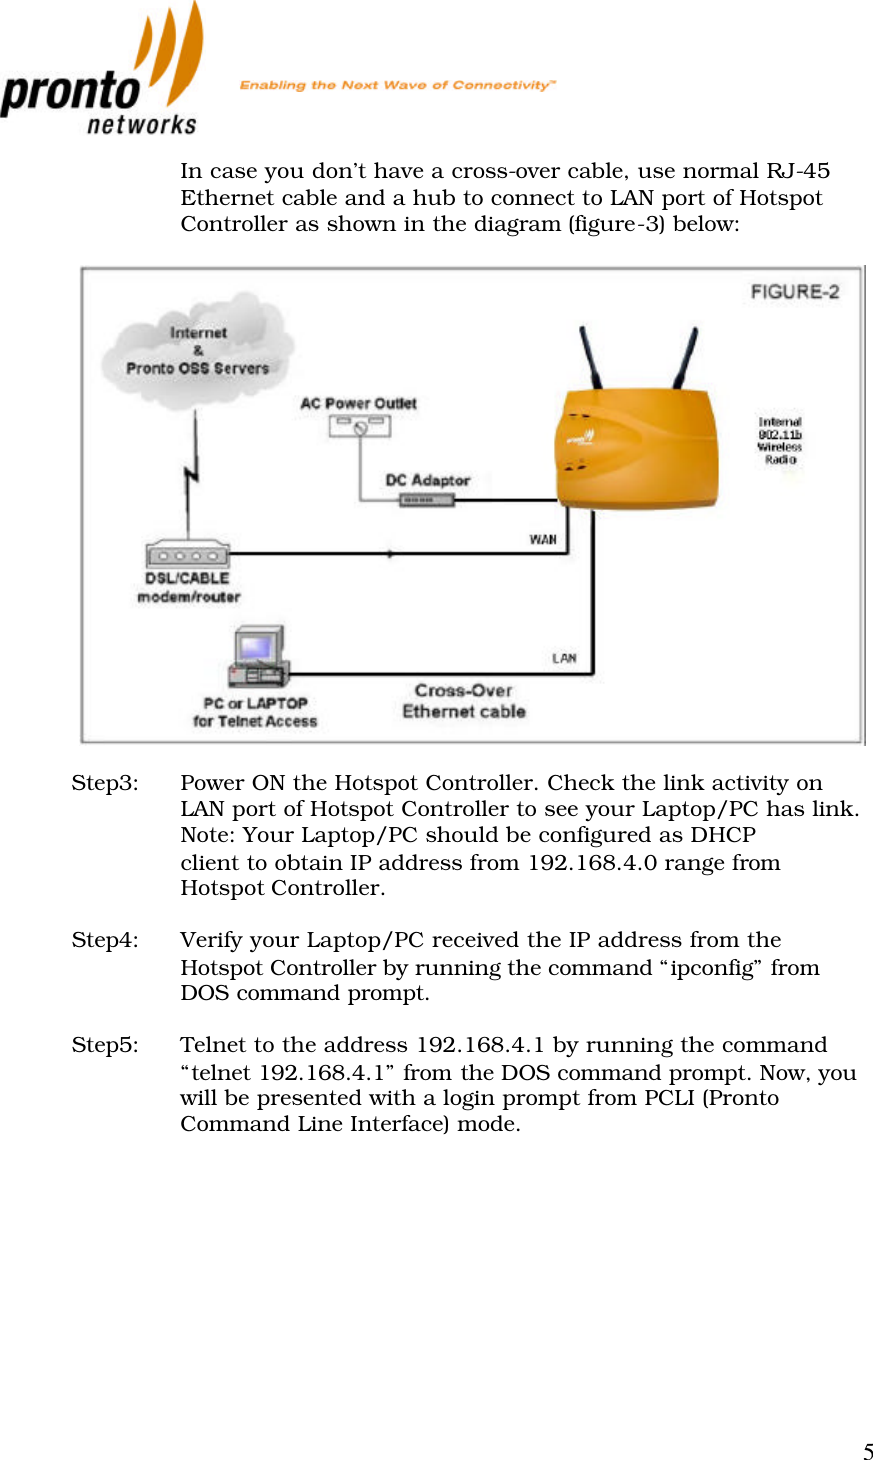           5  In case you don’t have a cross-over cable, use normal RJ-45 Ethernet cable and a hub to connect to LAN port of Hotspot Controller as shown in the diagram (figure-3) below:    Step3: Power ON the Hotspot Controller. Check the link activity on LAN port of Hotspot Controller to see your Laptop/PC has link. Note: Your Laptop/PC should be configured as DHCP  client to obtain IP address from 192.168.4.0 range from Hotspot Controller.  Step4: Verify your Laptop/PC received the IP address from the Hotspot Controller by running the command “ipconfig” from DOS command prompt.  Step5: Telnet to the address 192.168.4.1 by running the command “telnet 192.168.4.1” from the DOS command prompt. Now, you will be presented with a login prompt from PCLI (Pronto Command Line Interface) mode. 